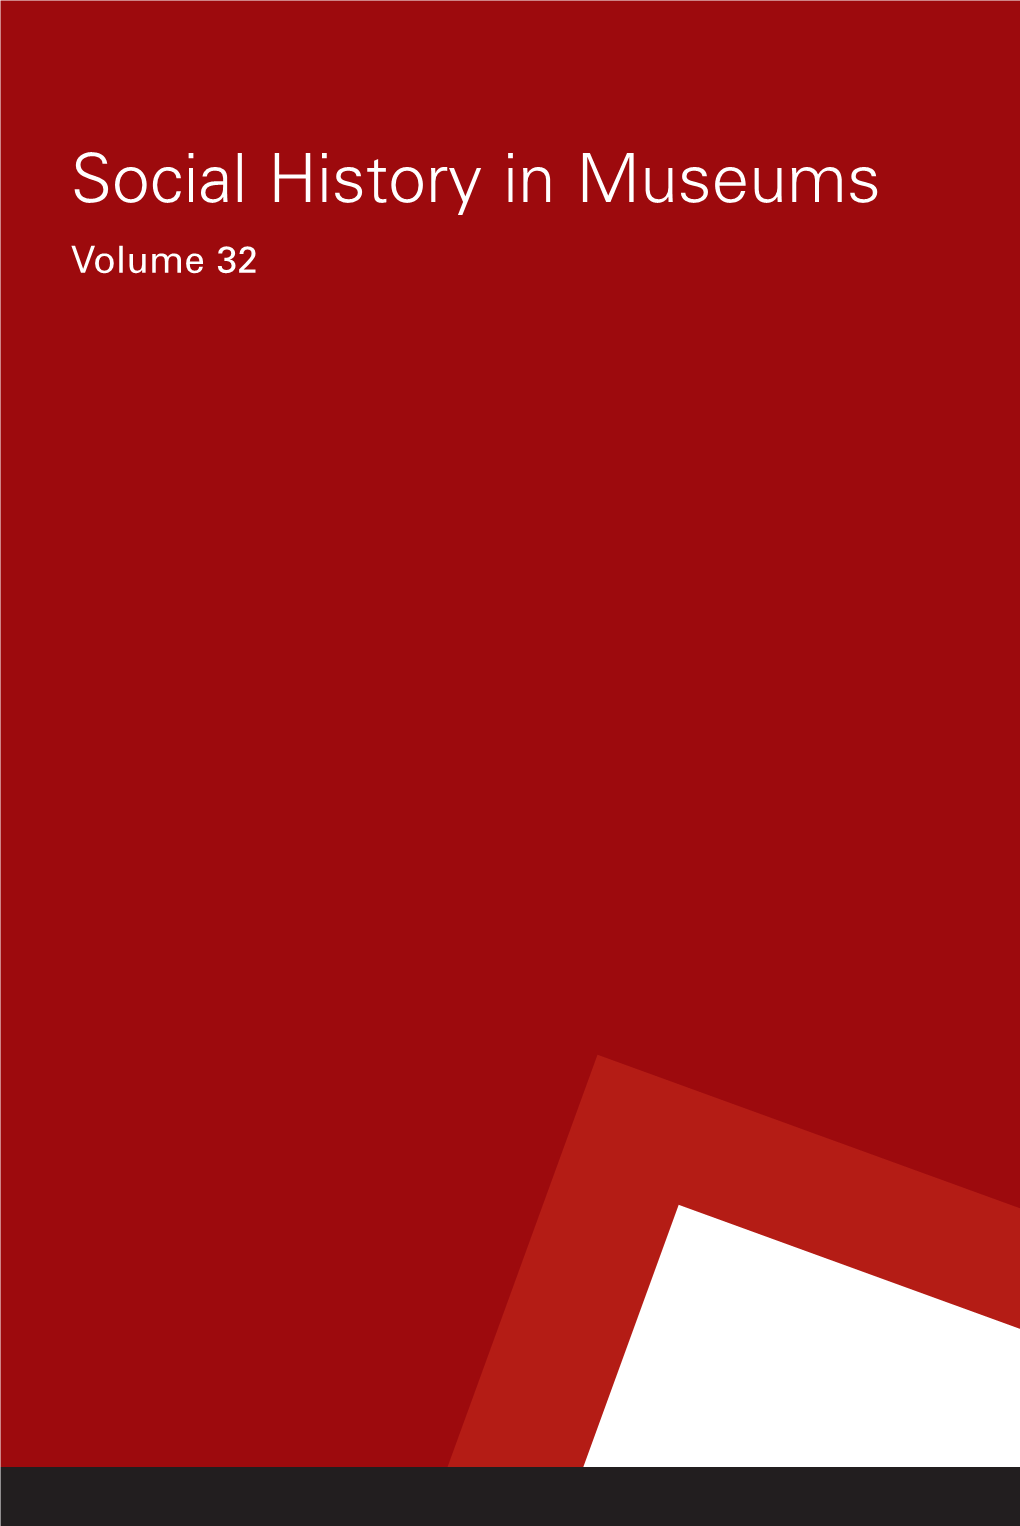 Social History in Museums Volume 32 Social History in Museums